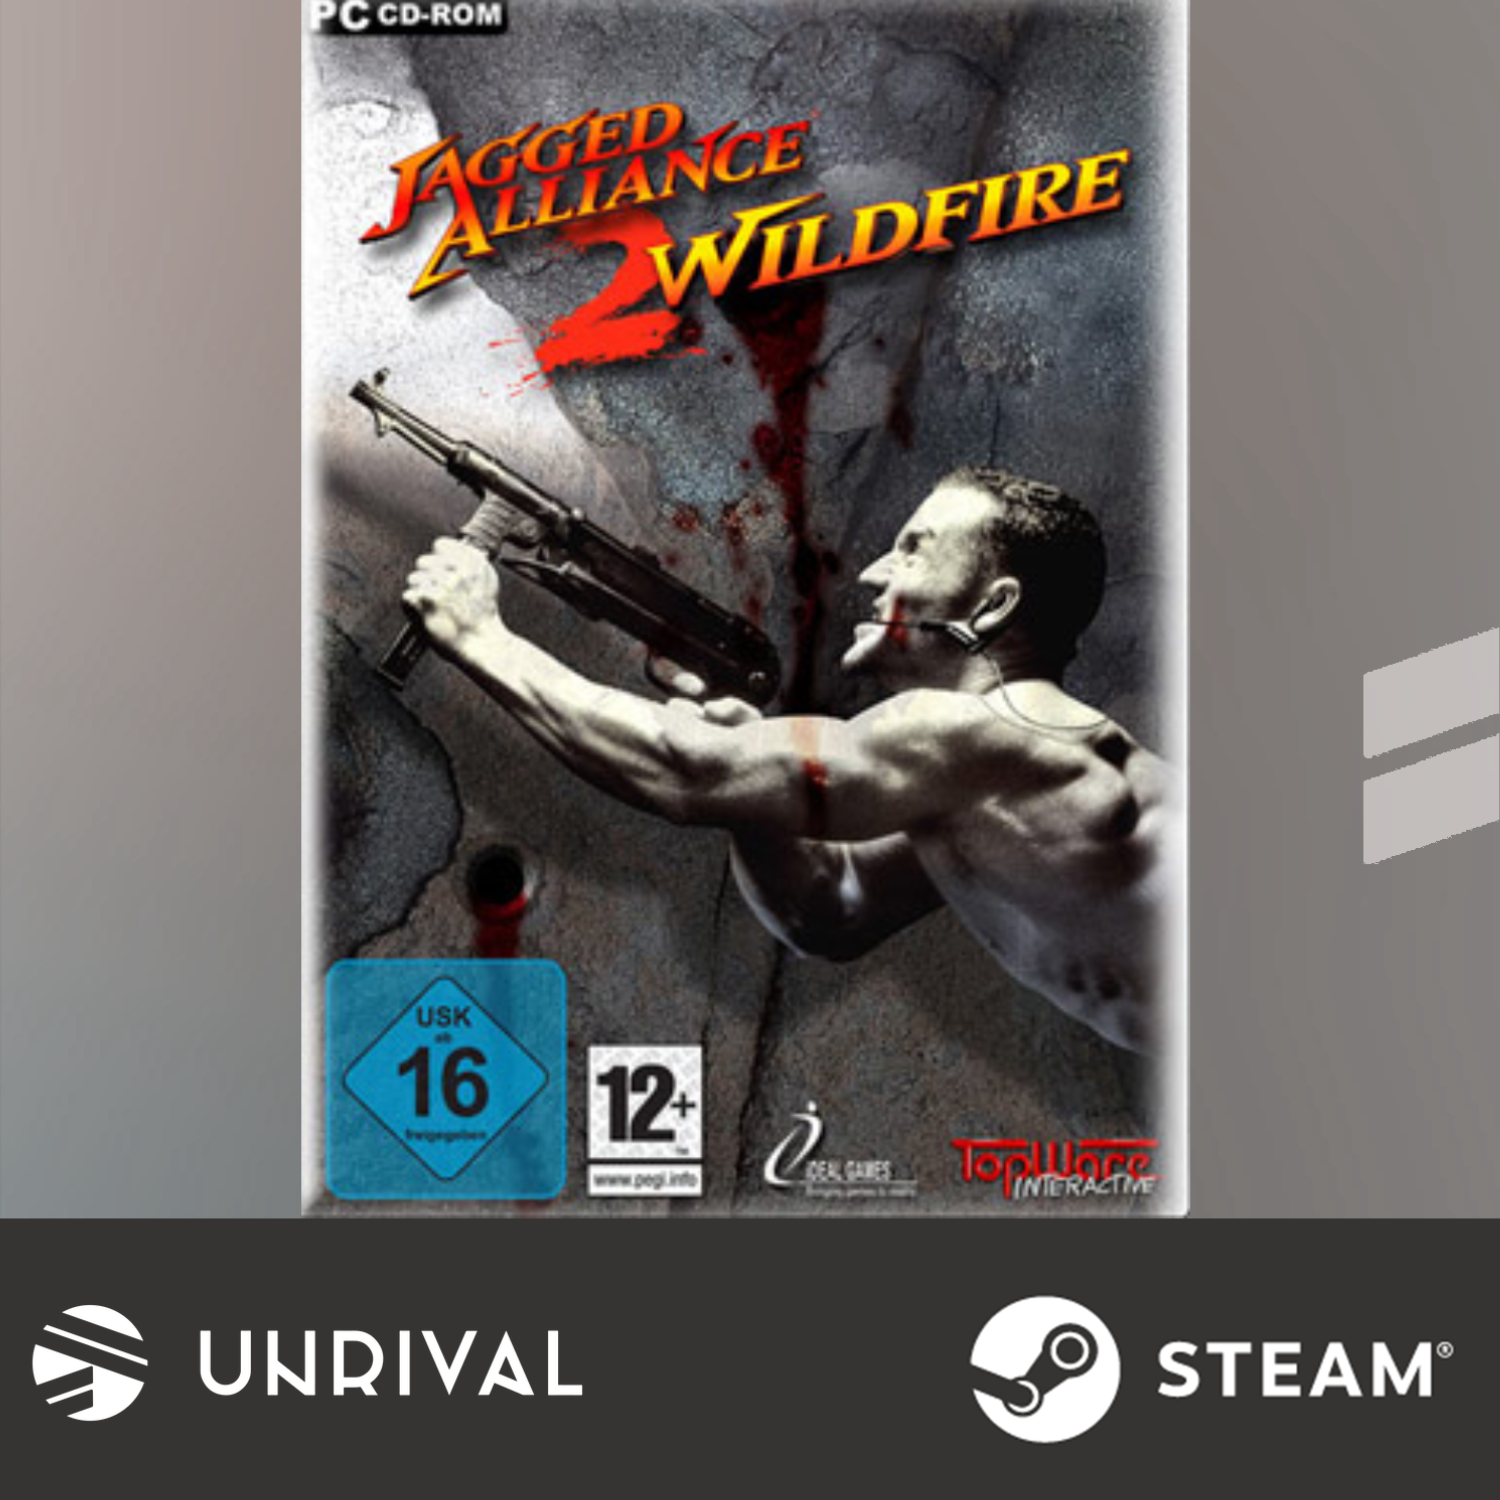 Jagged Alliance 2 Wildfire PC Digital Download Game - Unrival